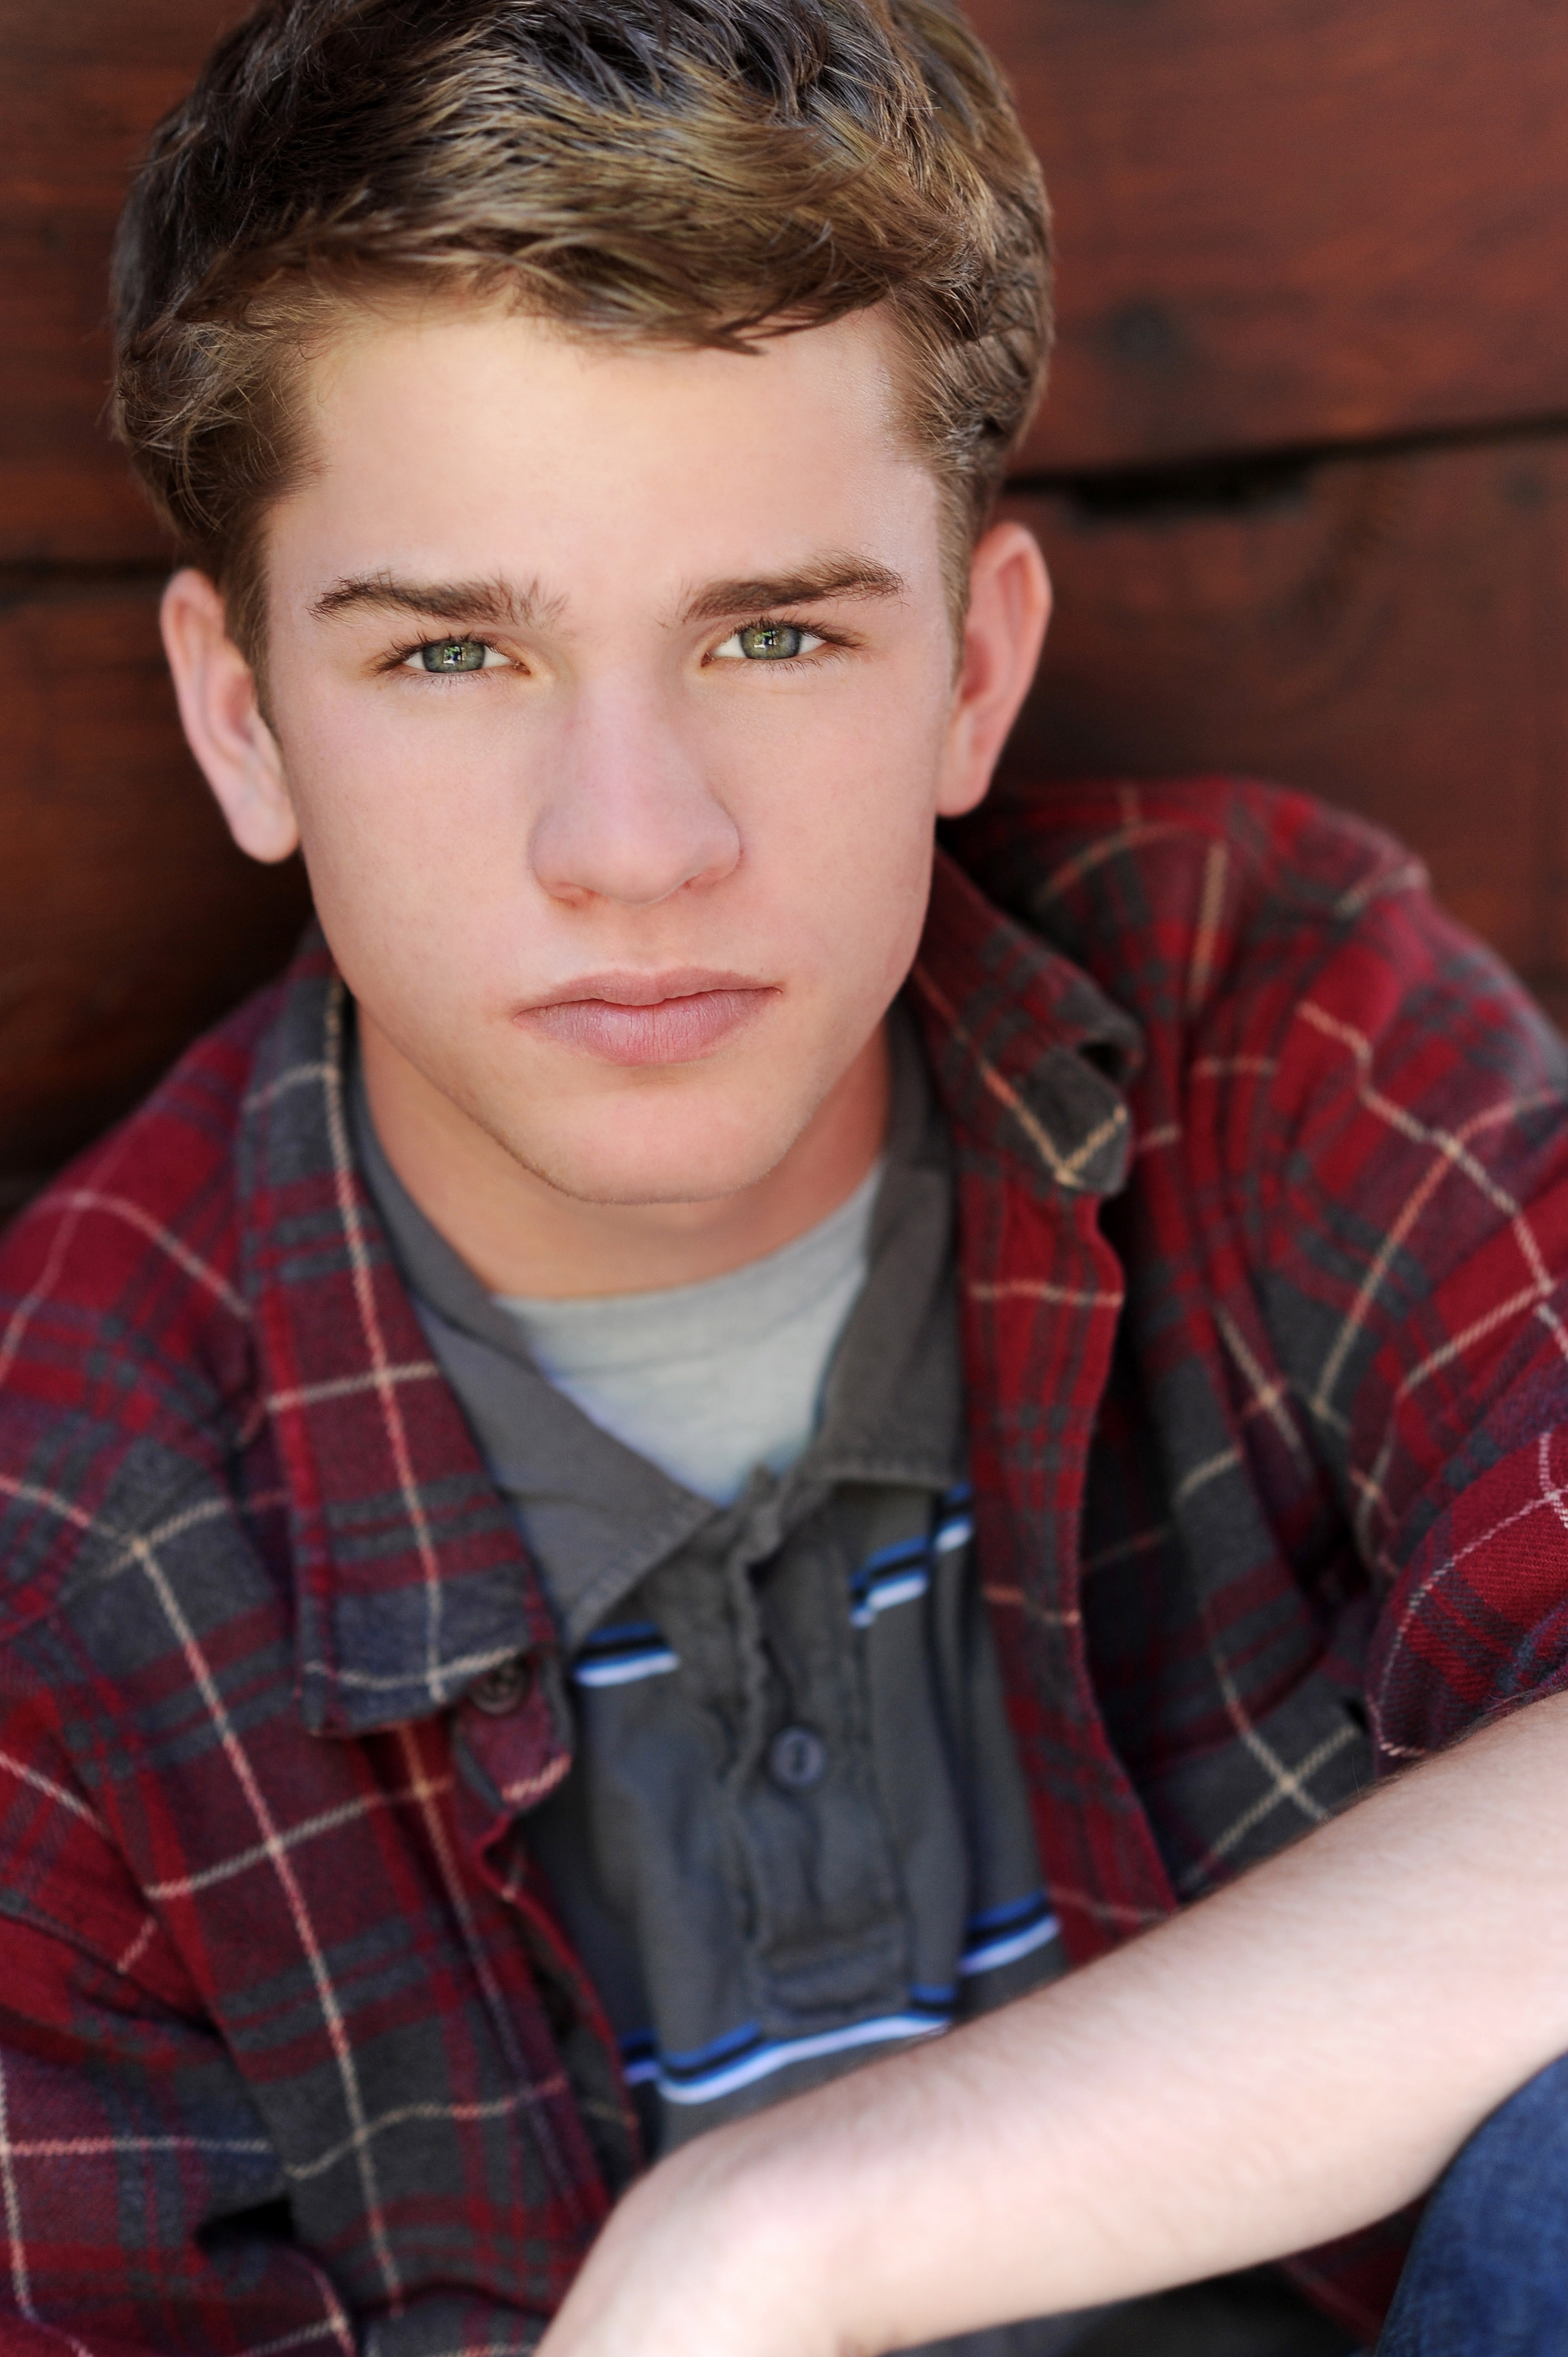 Alex Foley Youth Talent Connection 17332 Irvine Blvd. #230 Tustin, CA 92780 Casting Cell: 714-315-8546 Heather Baldwin -agent